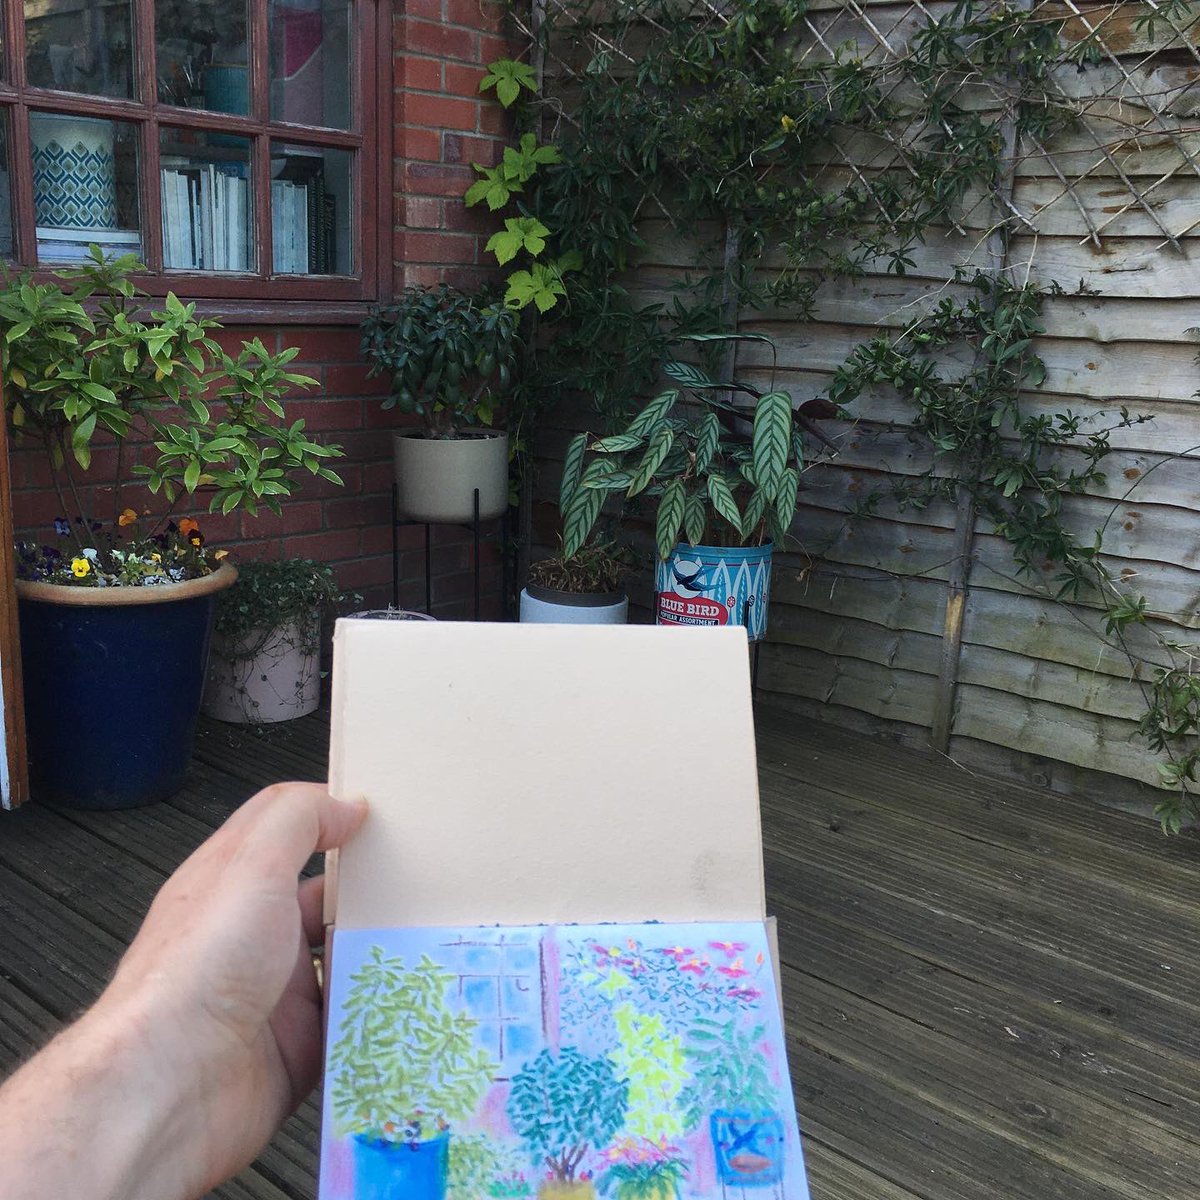 Sunday afternoon pastel sketching on the patio at home. #dailydrawing #gardendrawing #ArtistOnTwitter #ArtistOnX #thedailysketch